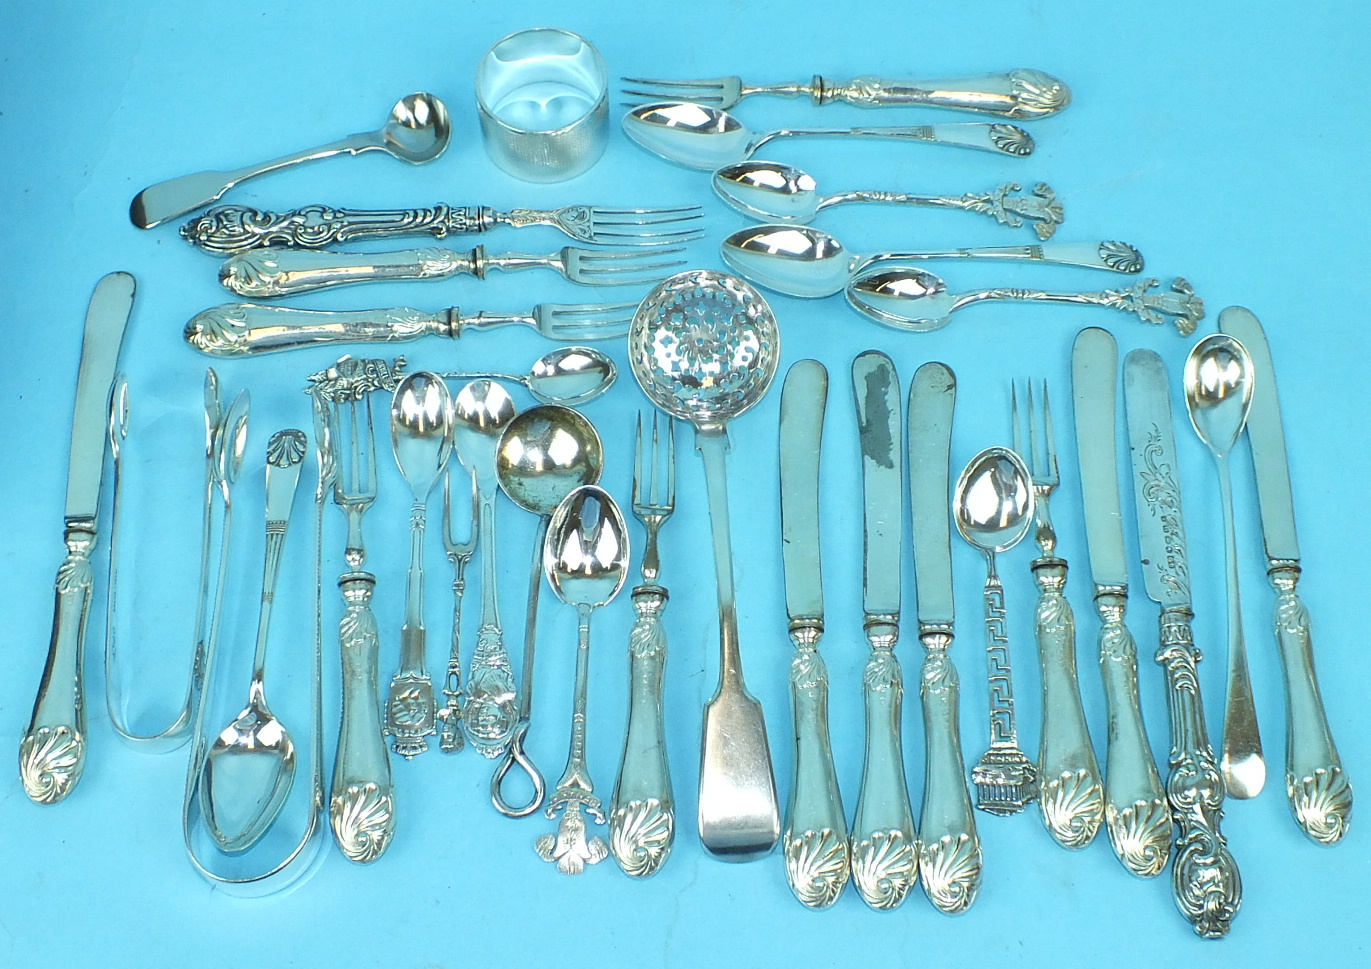 A set of six each silver-handled dessert eaters and other plated items.